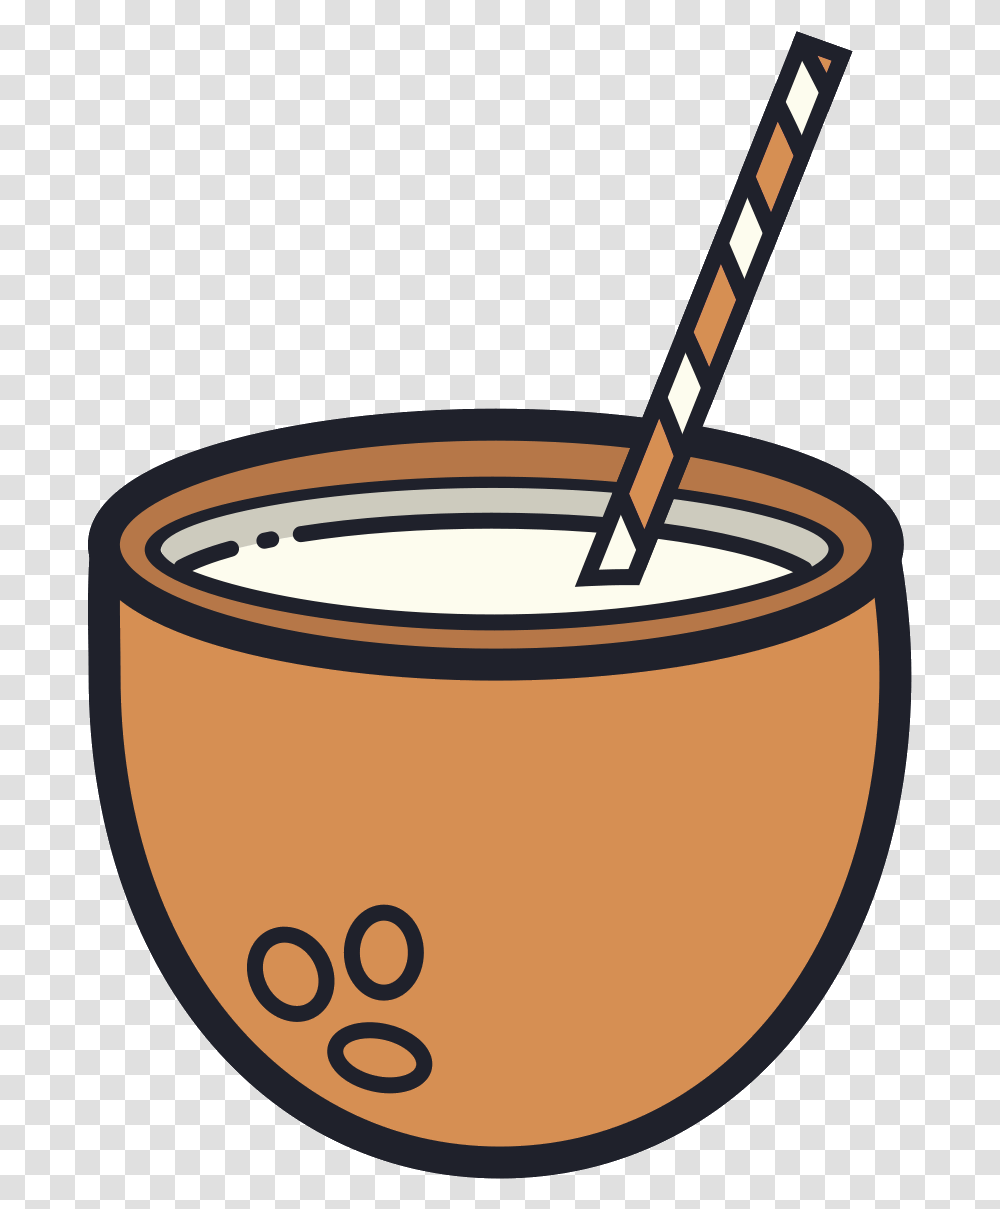 Coconut Cocktail Icon Pbs Kids Go, Beverage, Drink, Coffee Cup, Drum Transparent Png